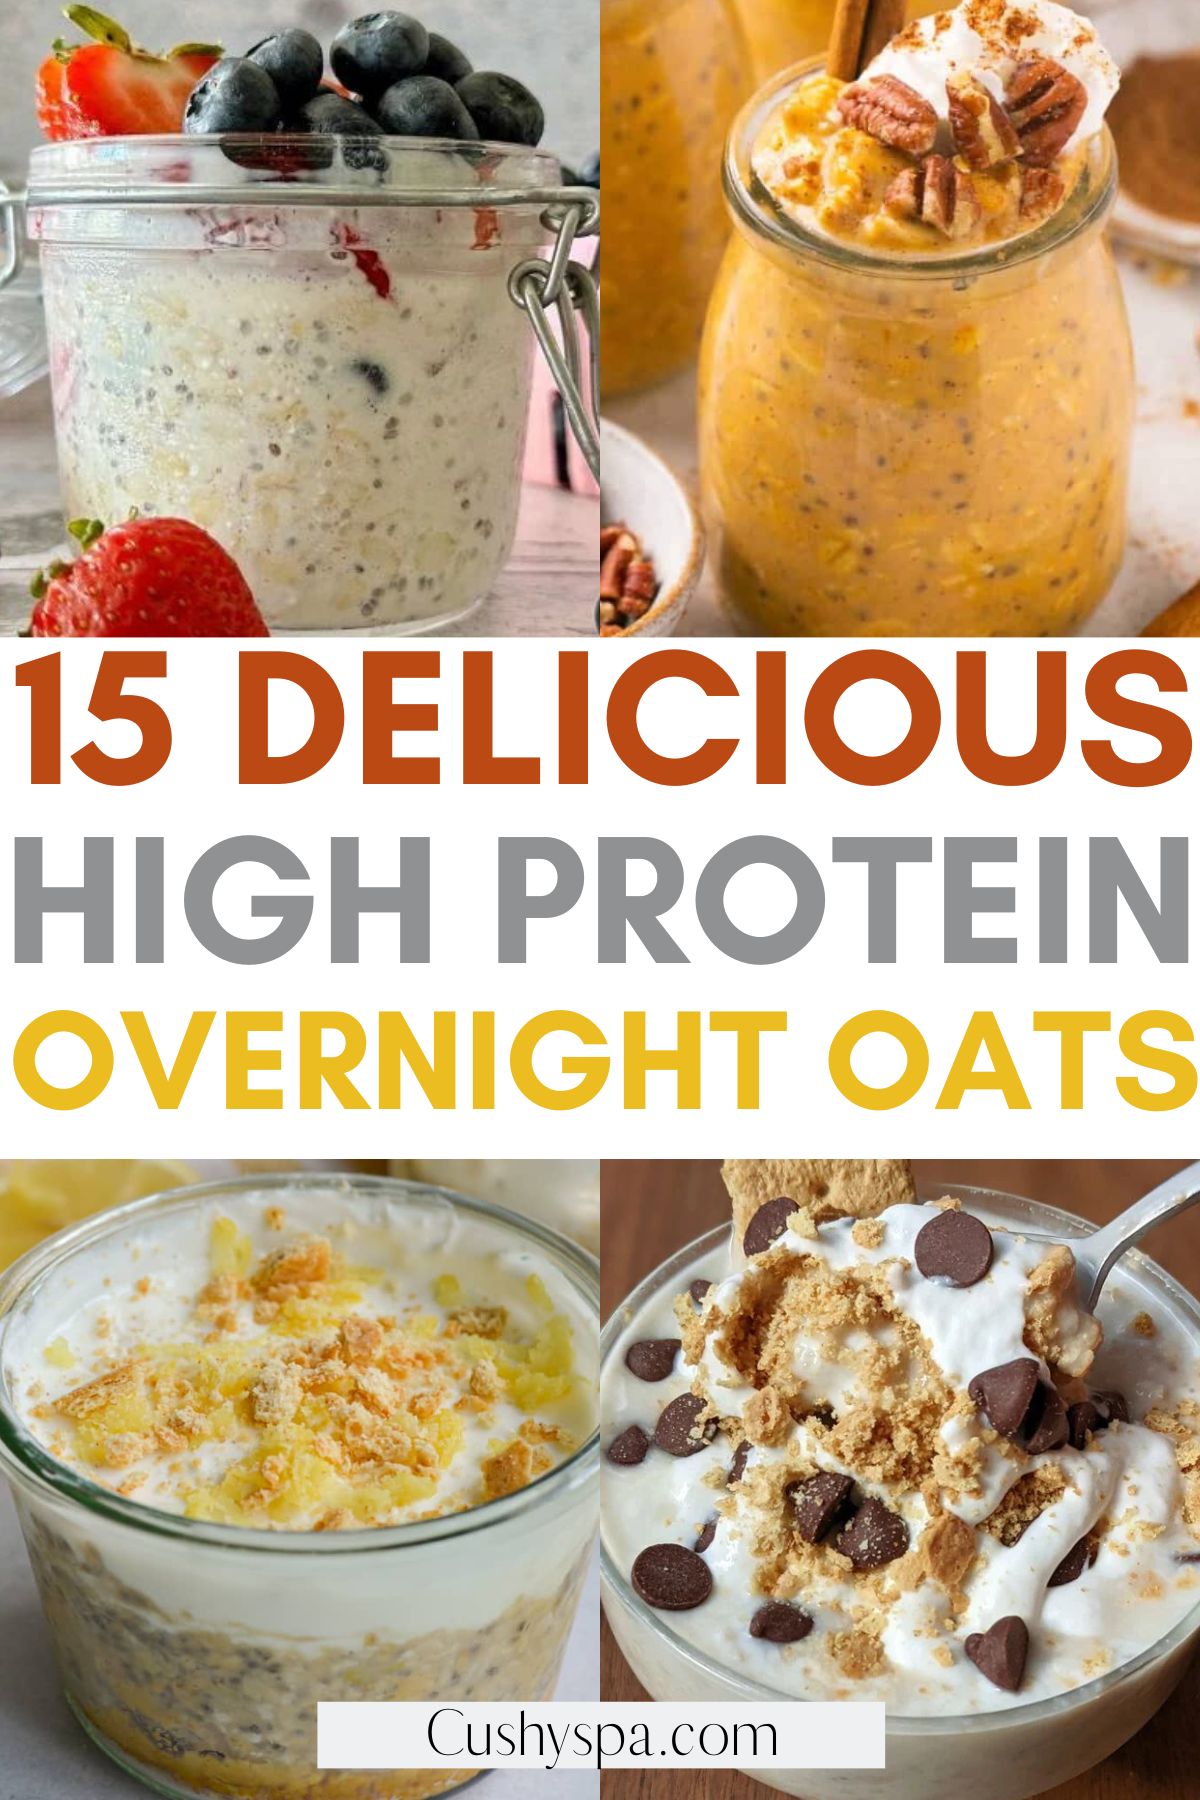 recipe ideas for High Protein Overnight Oats